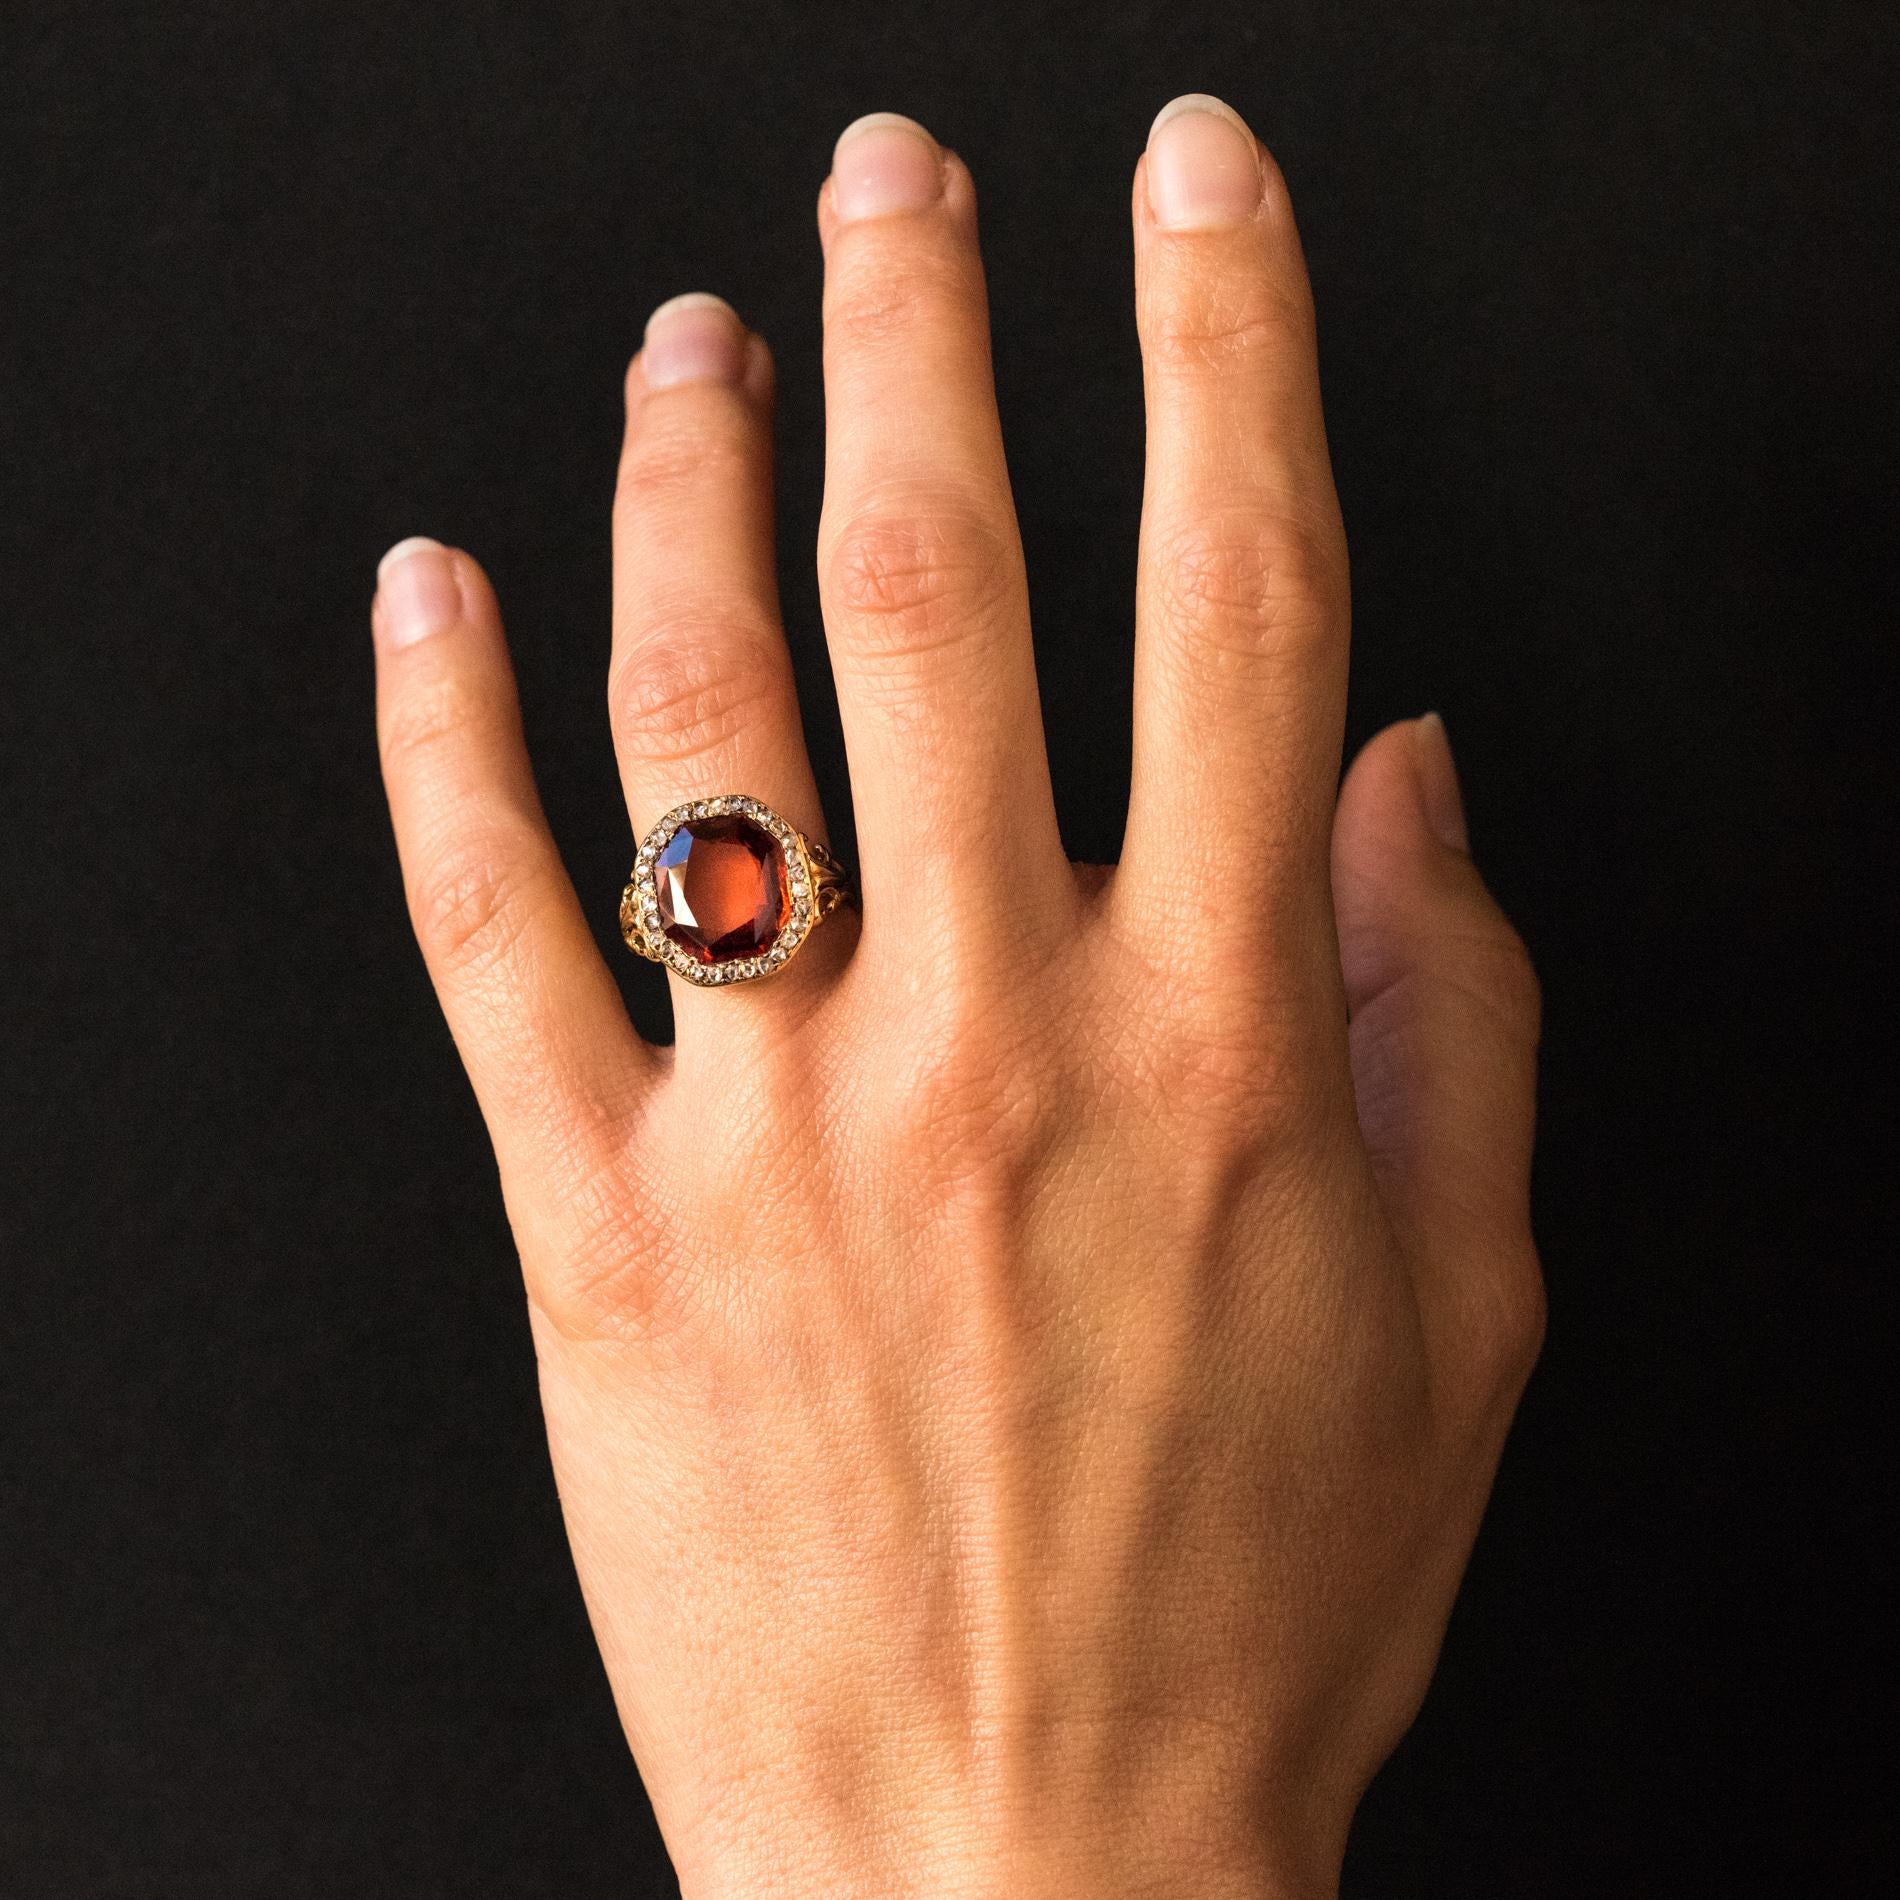 Ring in 18 carats yellow gold, eagle's head hallmark.
This beautiful ring is adorned with a hessonite orange garnet surrounded by rose-cut diamonds. On both sides, the start of the ring forms a fleur-de-lys pattern.
Total weight of garnet: 6.20